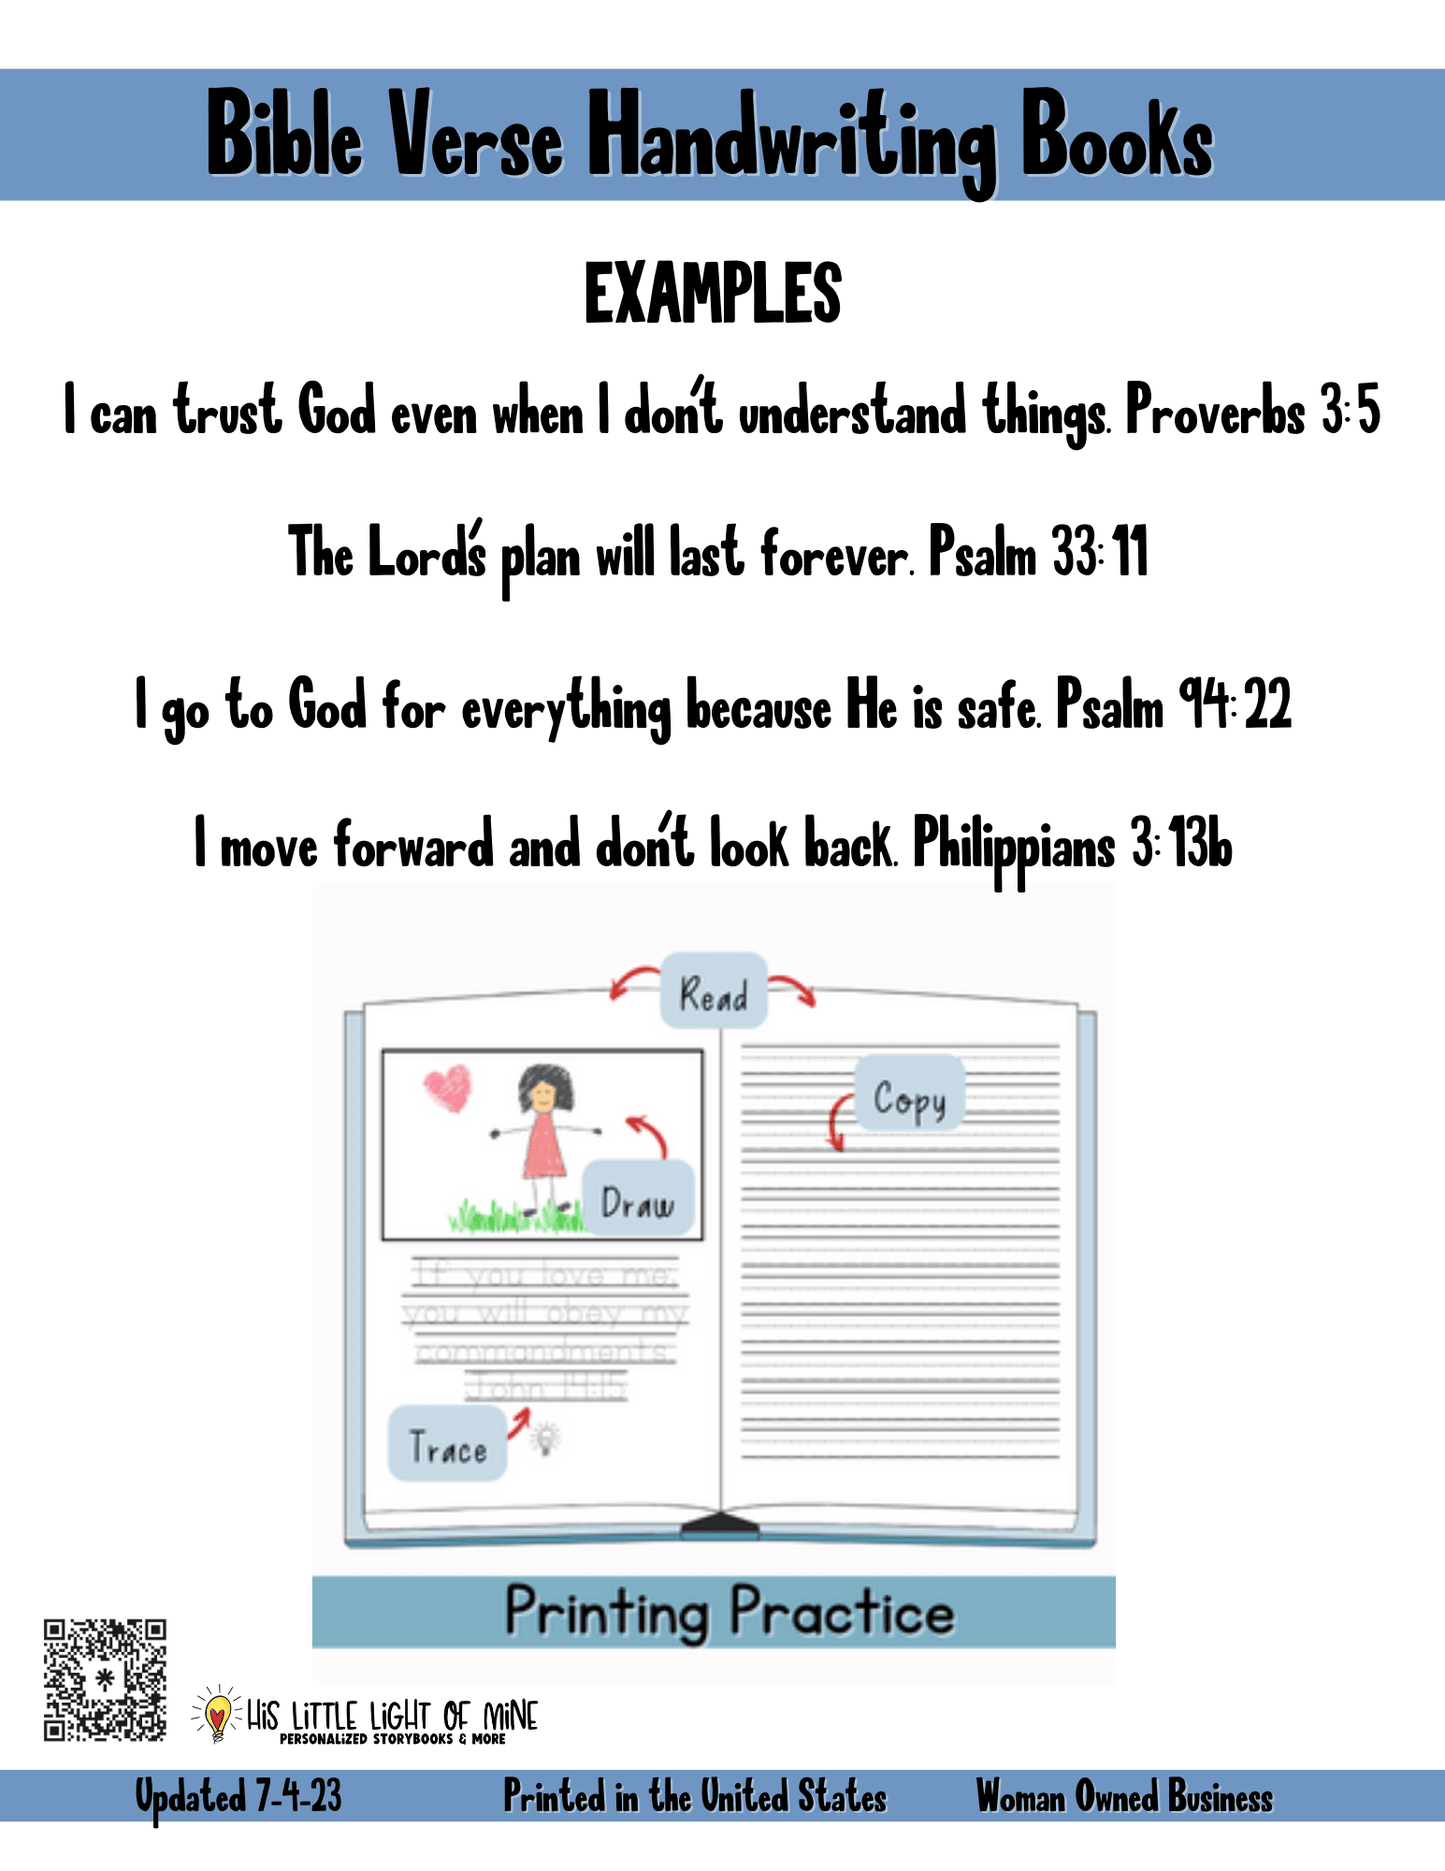 Examples of paraphrased Bible verses and interior in the Bible Verse Handwriting Books, self-published through Amazon KDP